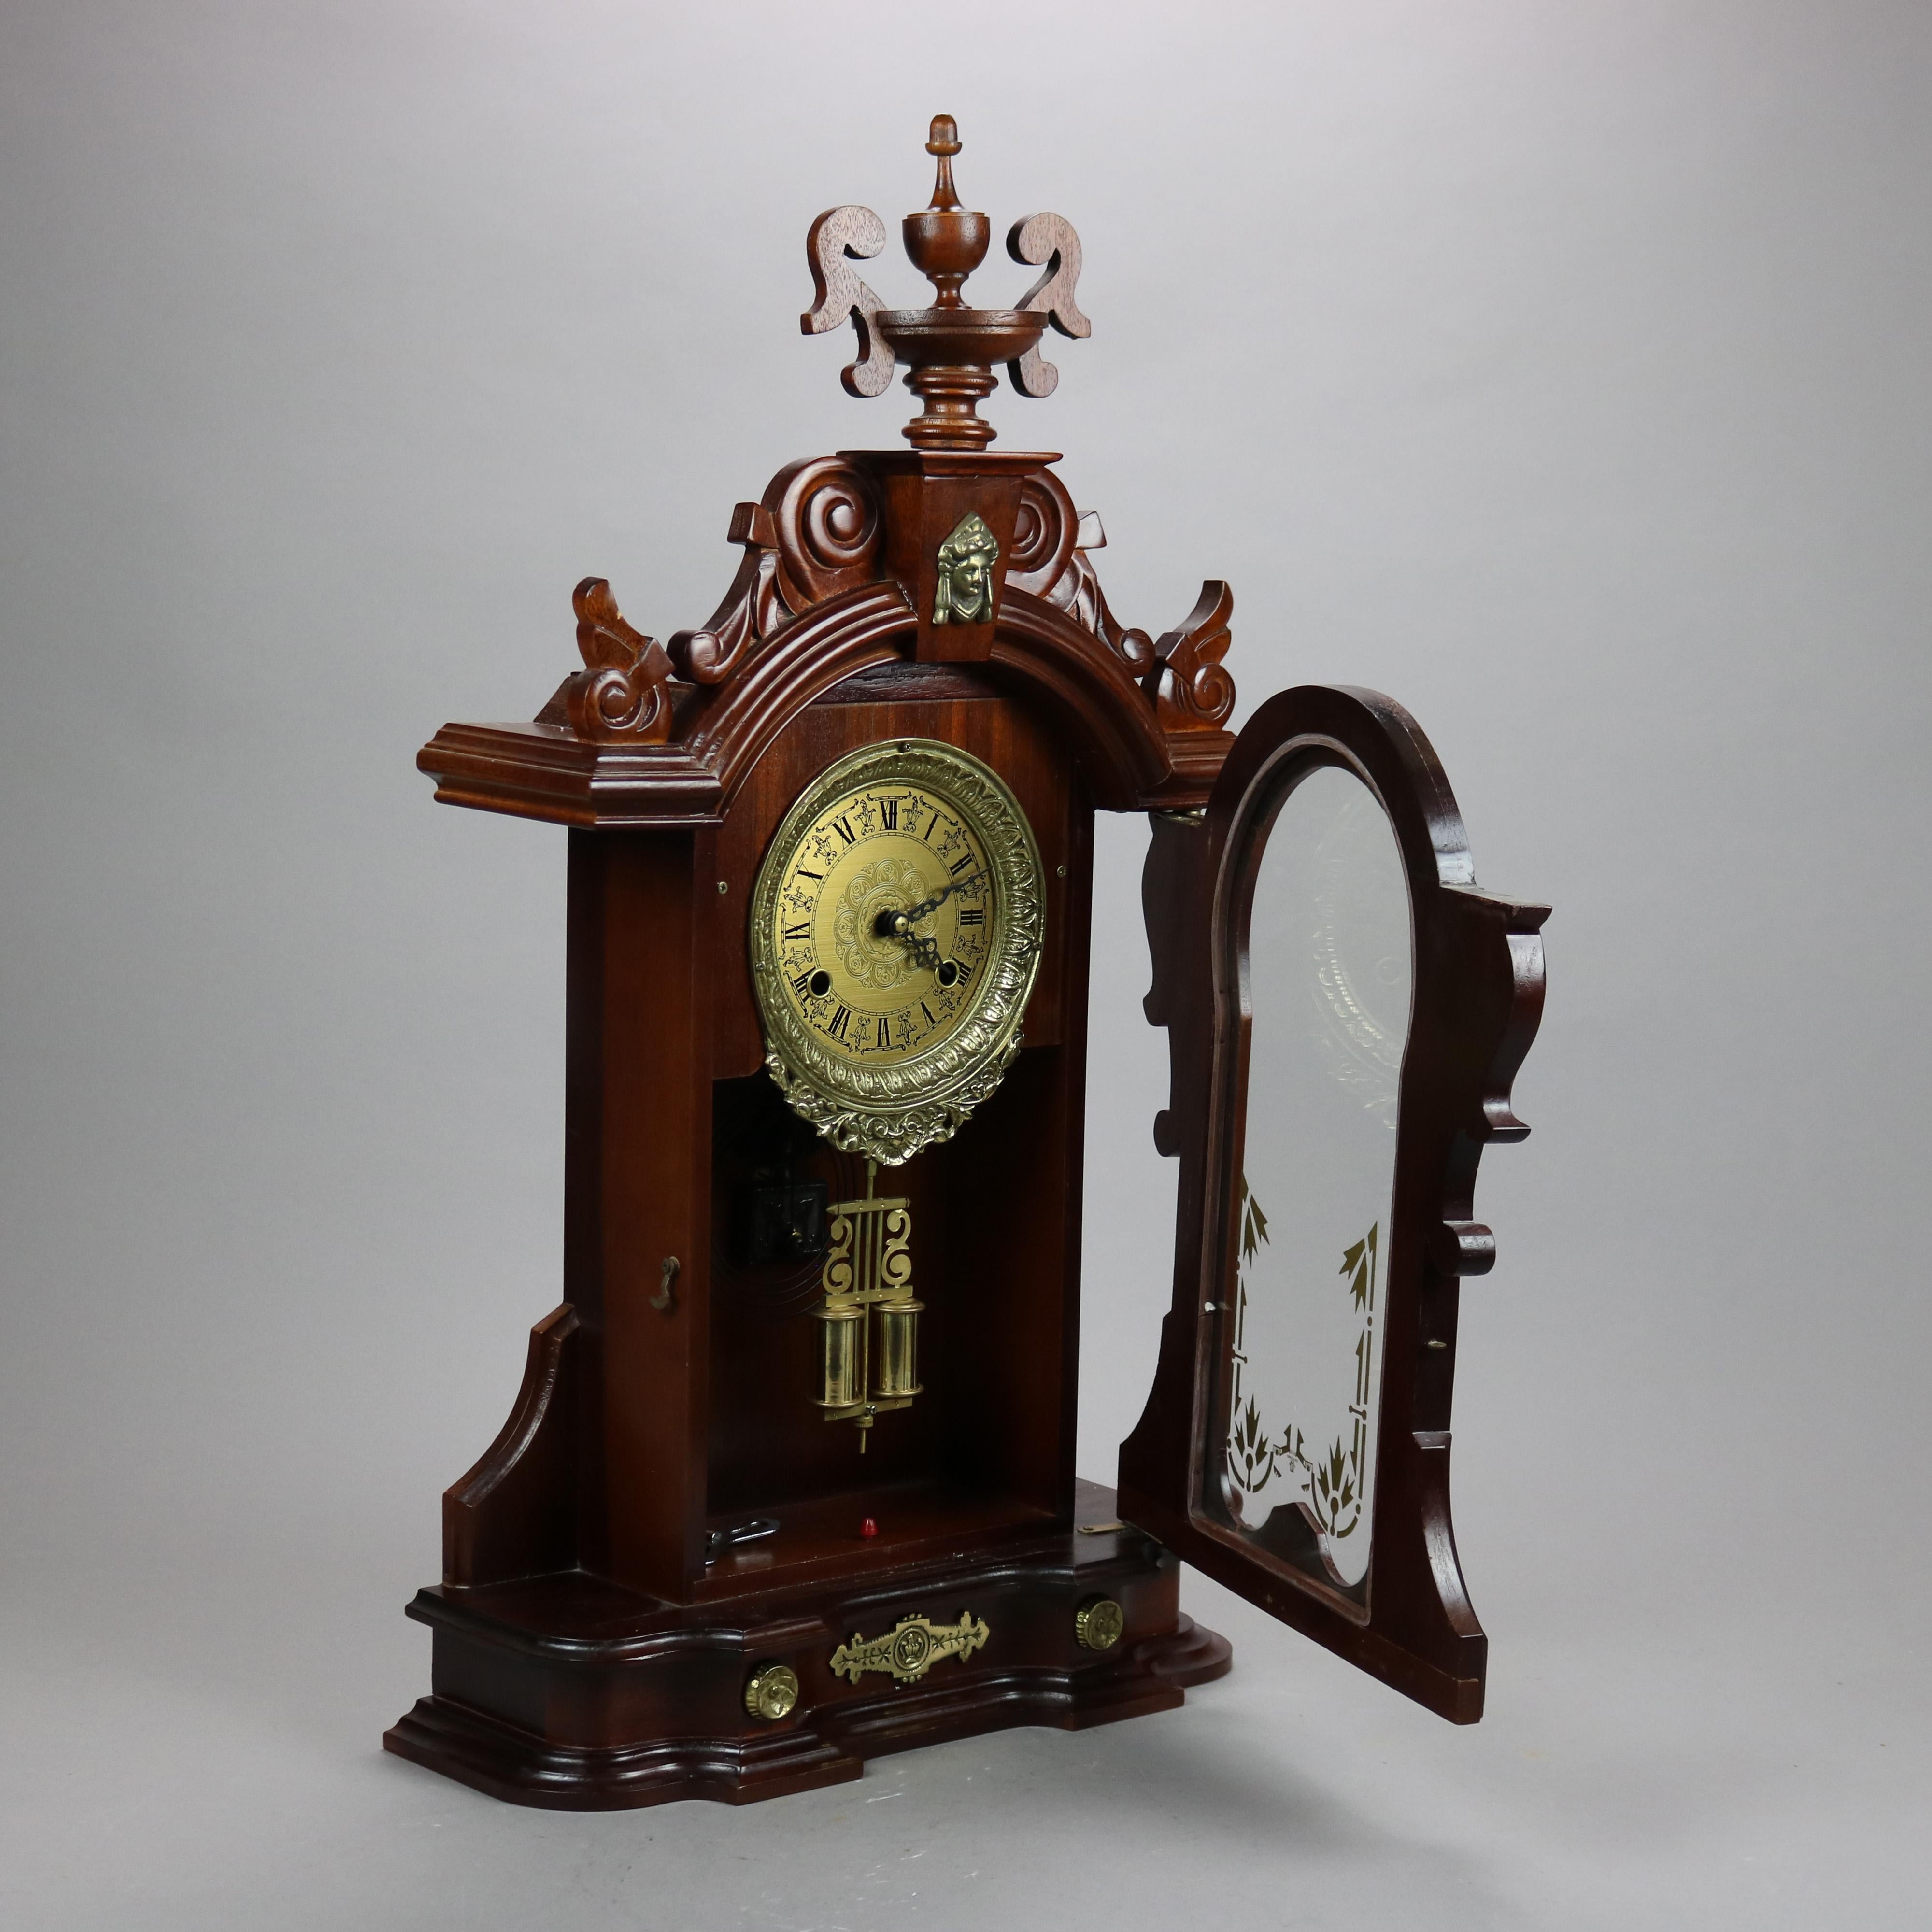 A Victorian style mantle clock offers carved mahogany or walnut case with crest having central urn finial and flanking scroll elements, cast female mask over face having Roman numerals and single glass door with gilt decoration, seated on shaped